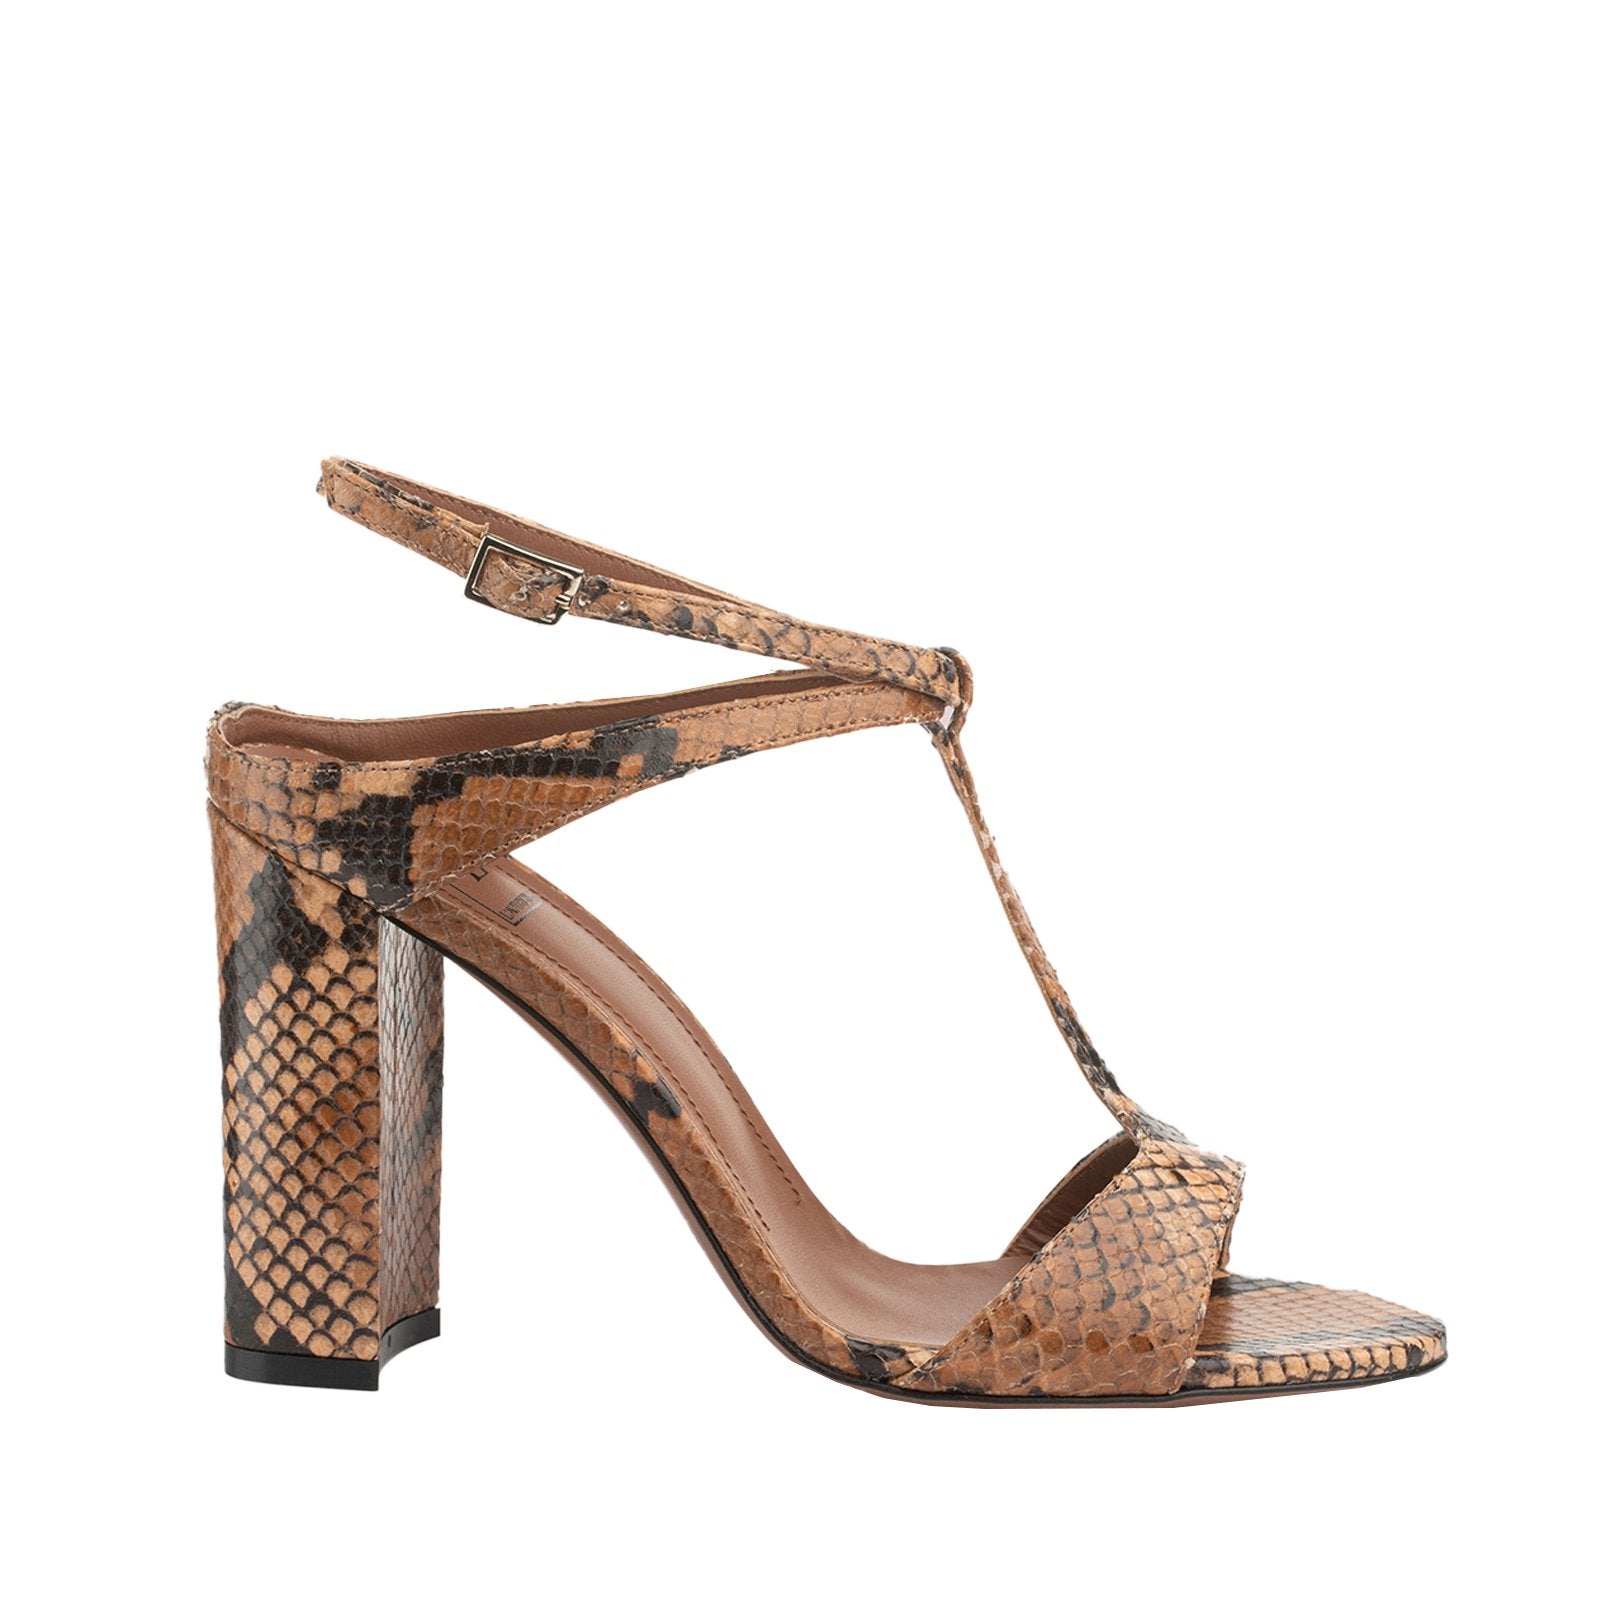 Open Toe Sandals In Cigar Python Print Leather LDL054.95CP29112106 - 1